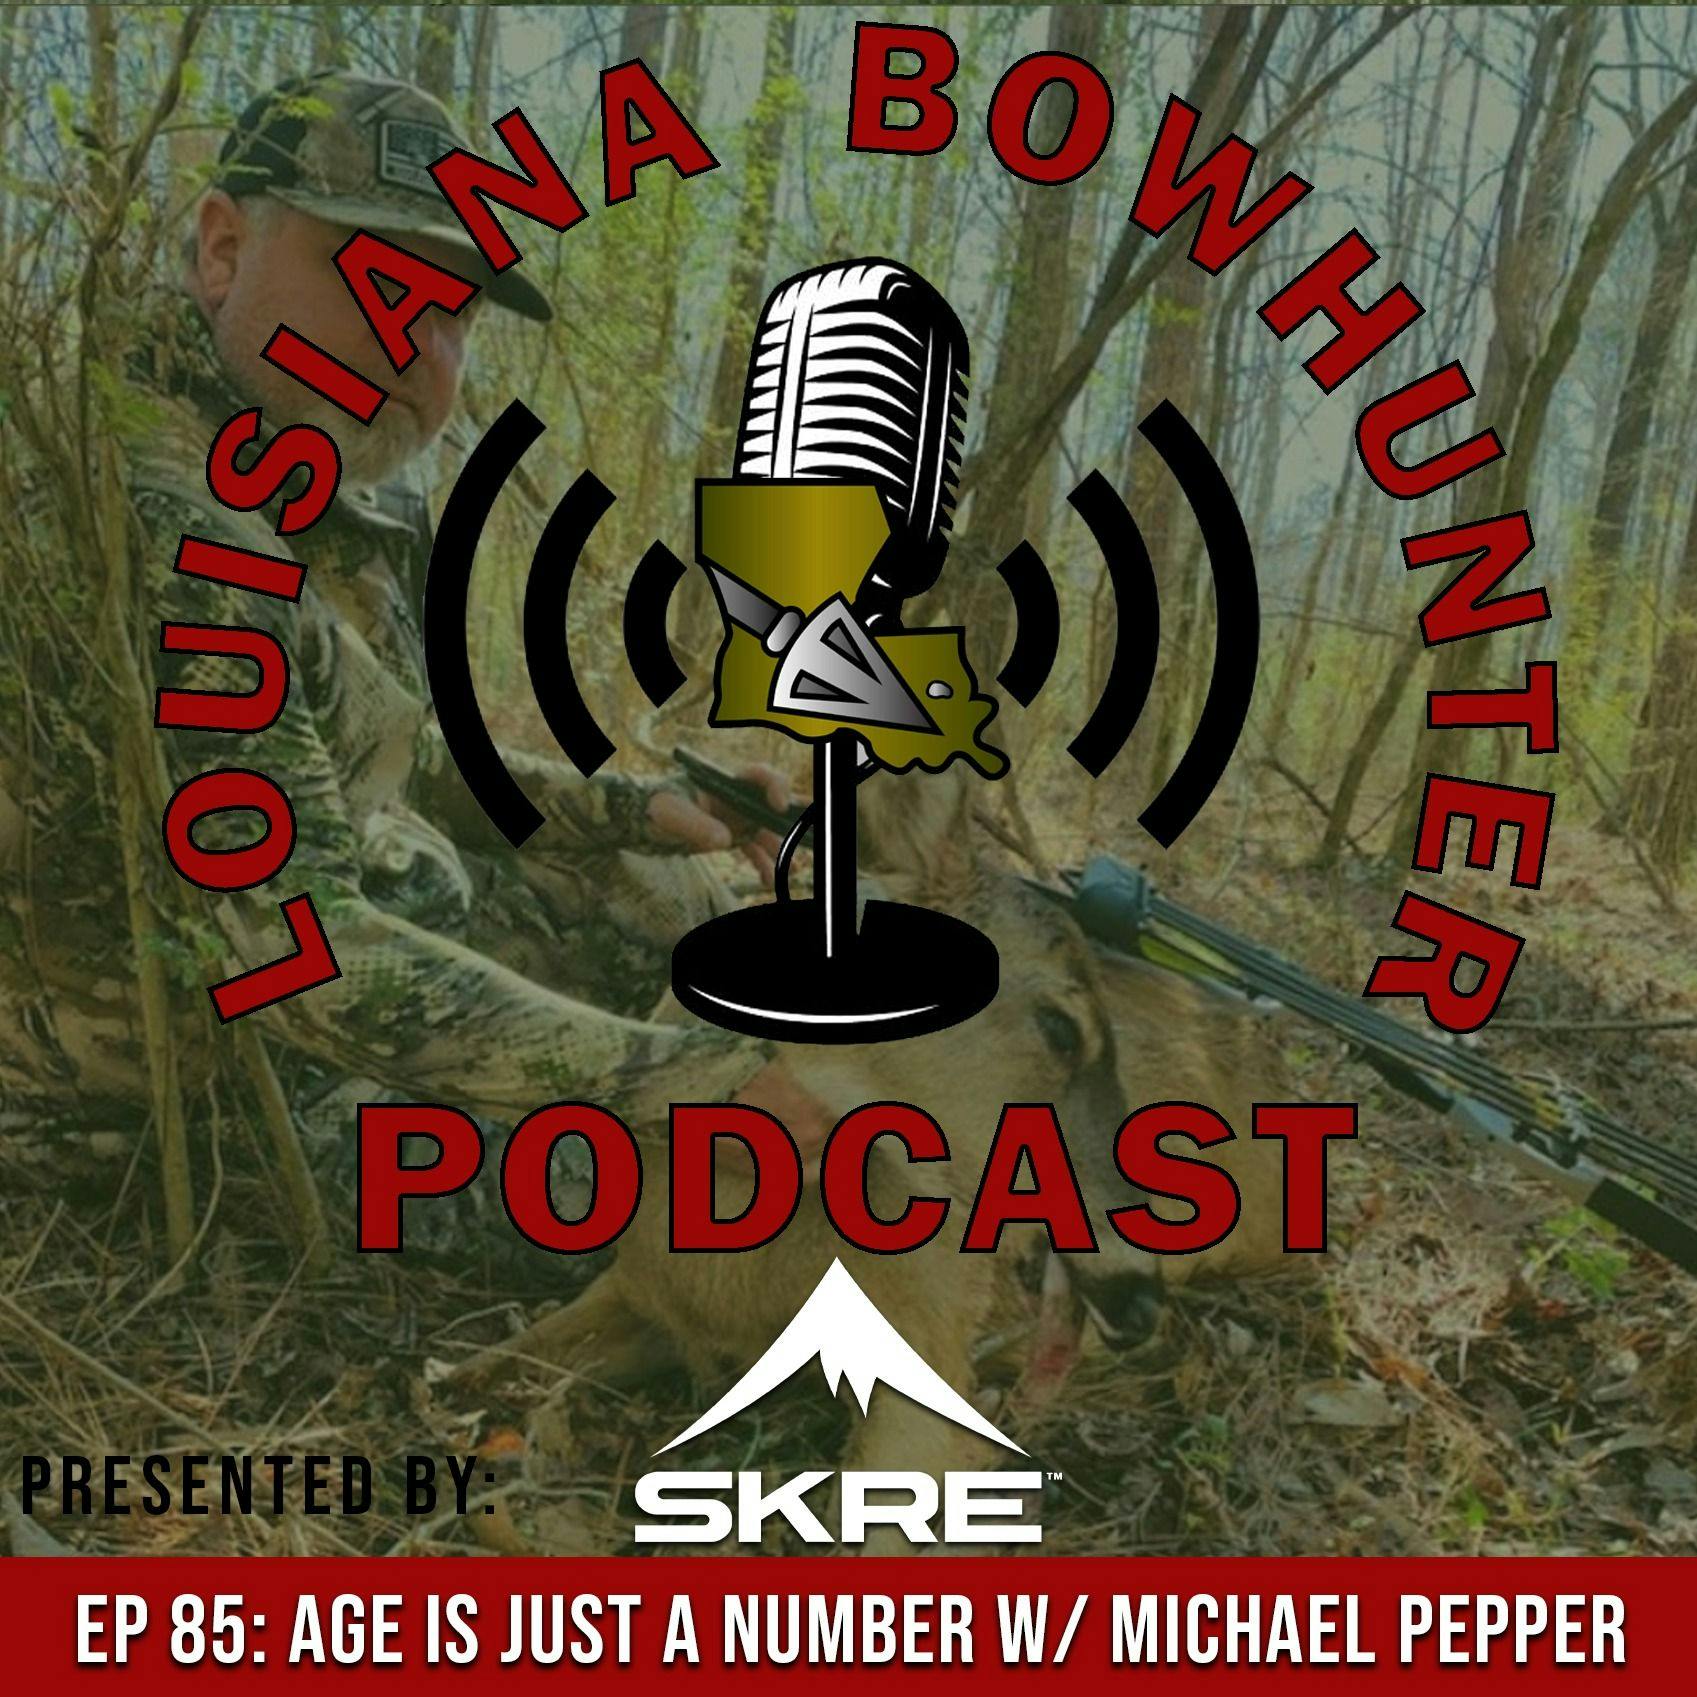 Episode 85: Age is Just a Number w/ Michael Pepper